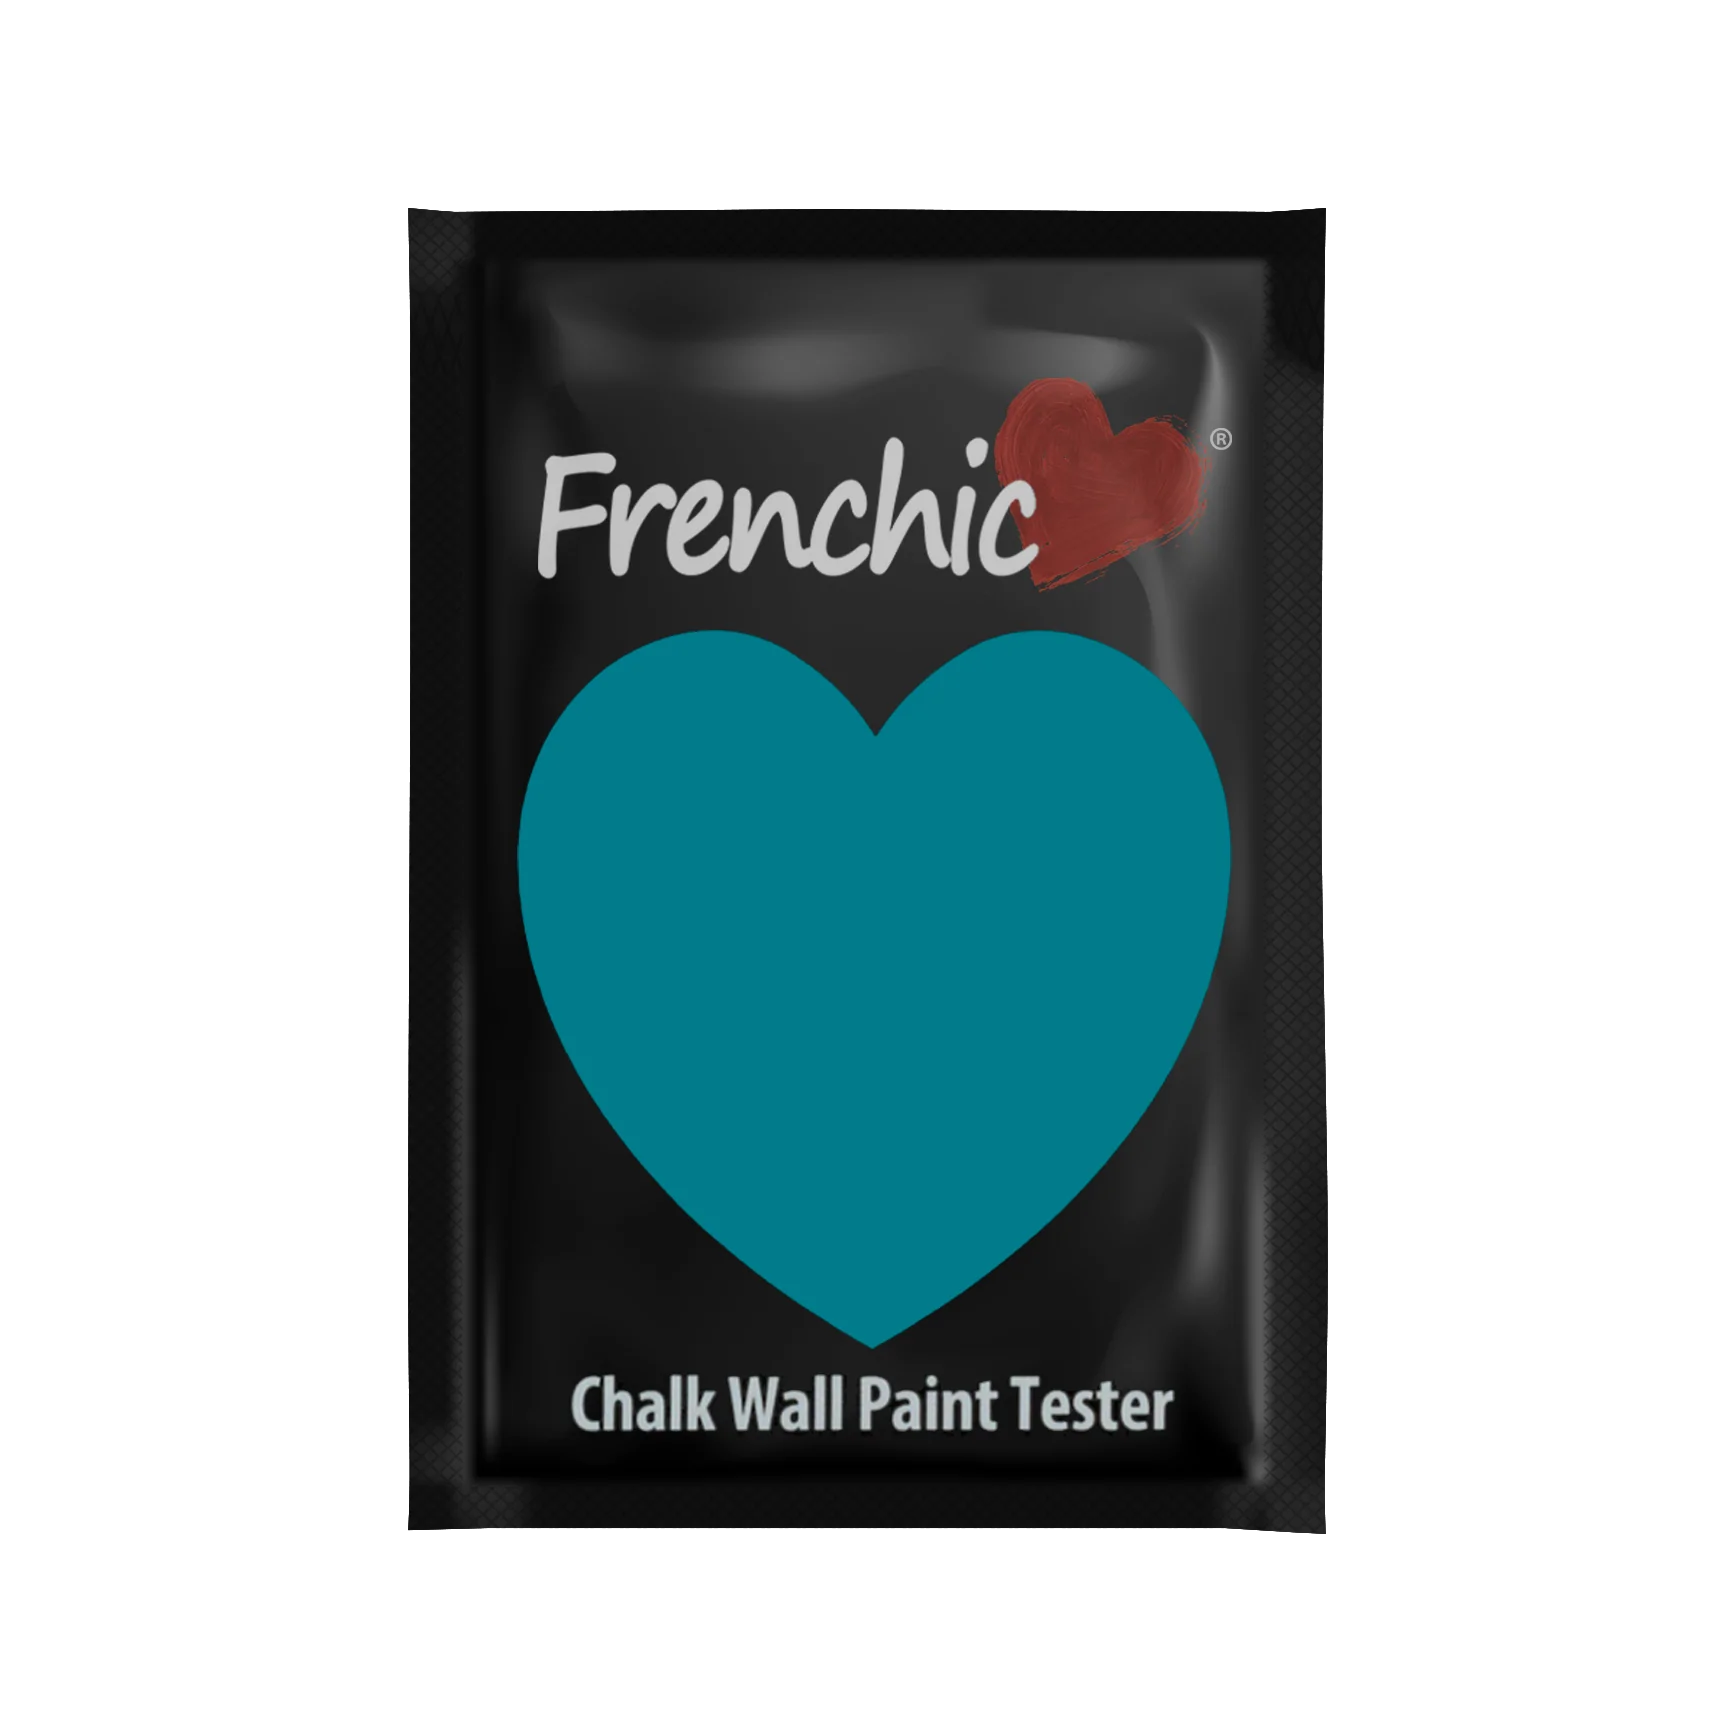 Frenchic Paint | Pinch Punch Wall Paint Sample by Weirs of Baggot Street